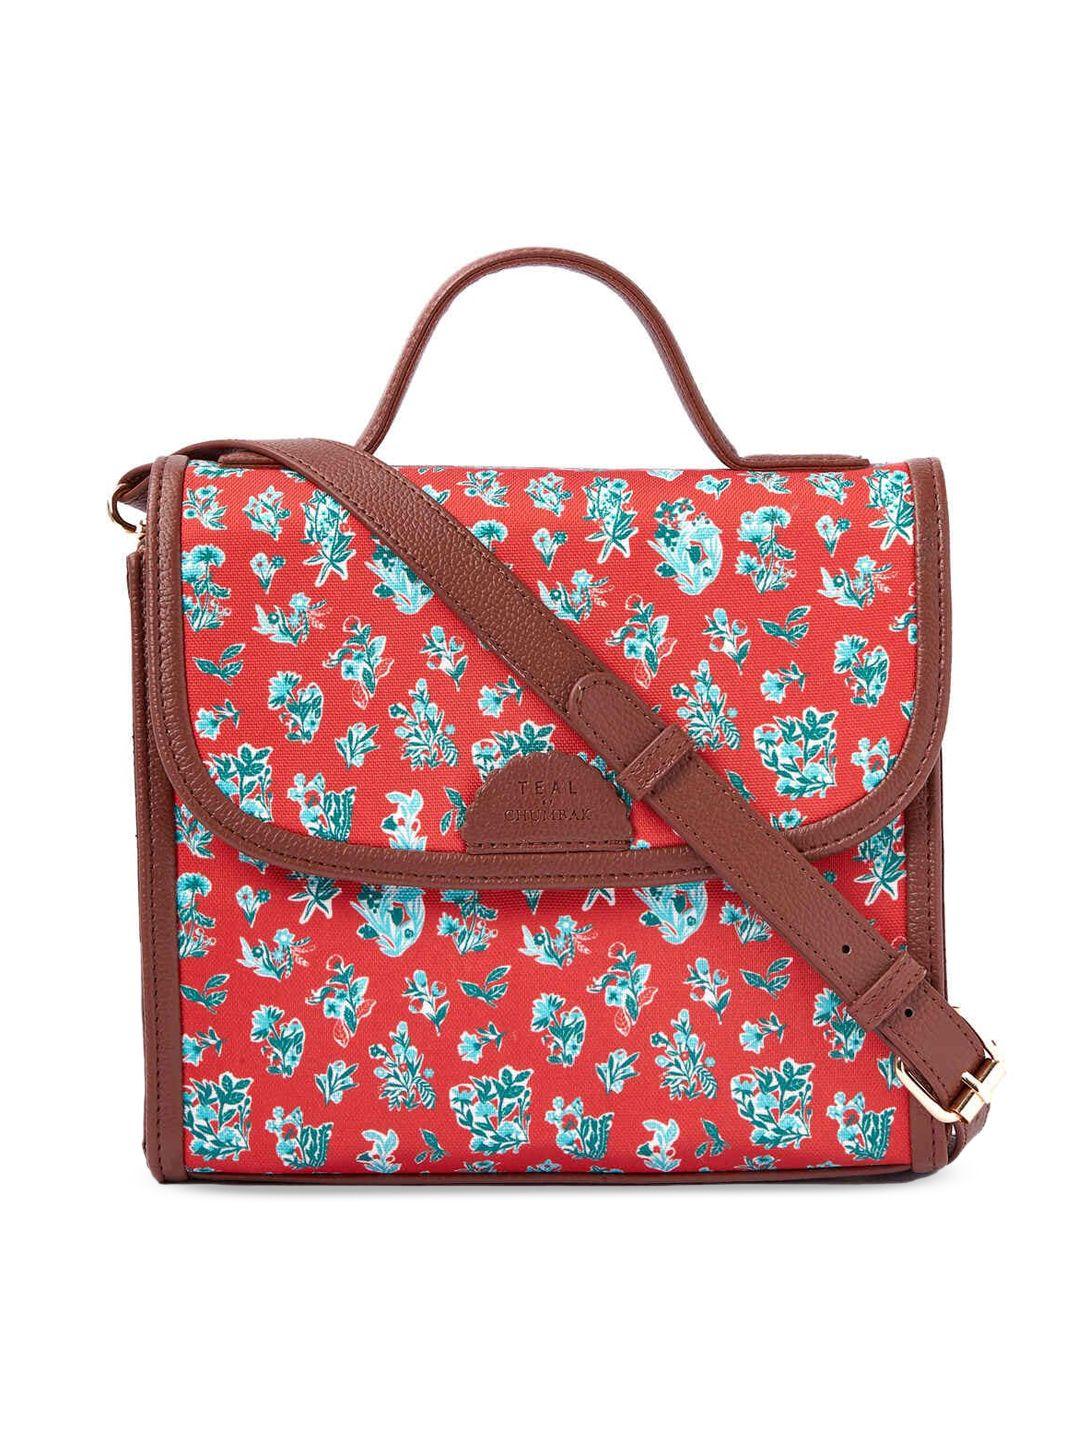 teal by chumbak detachable sling strap floral printed structured satchel bag